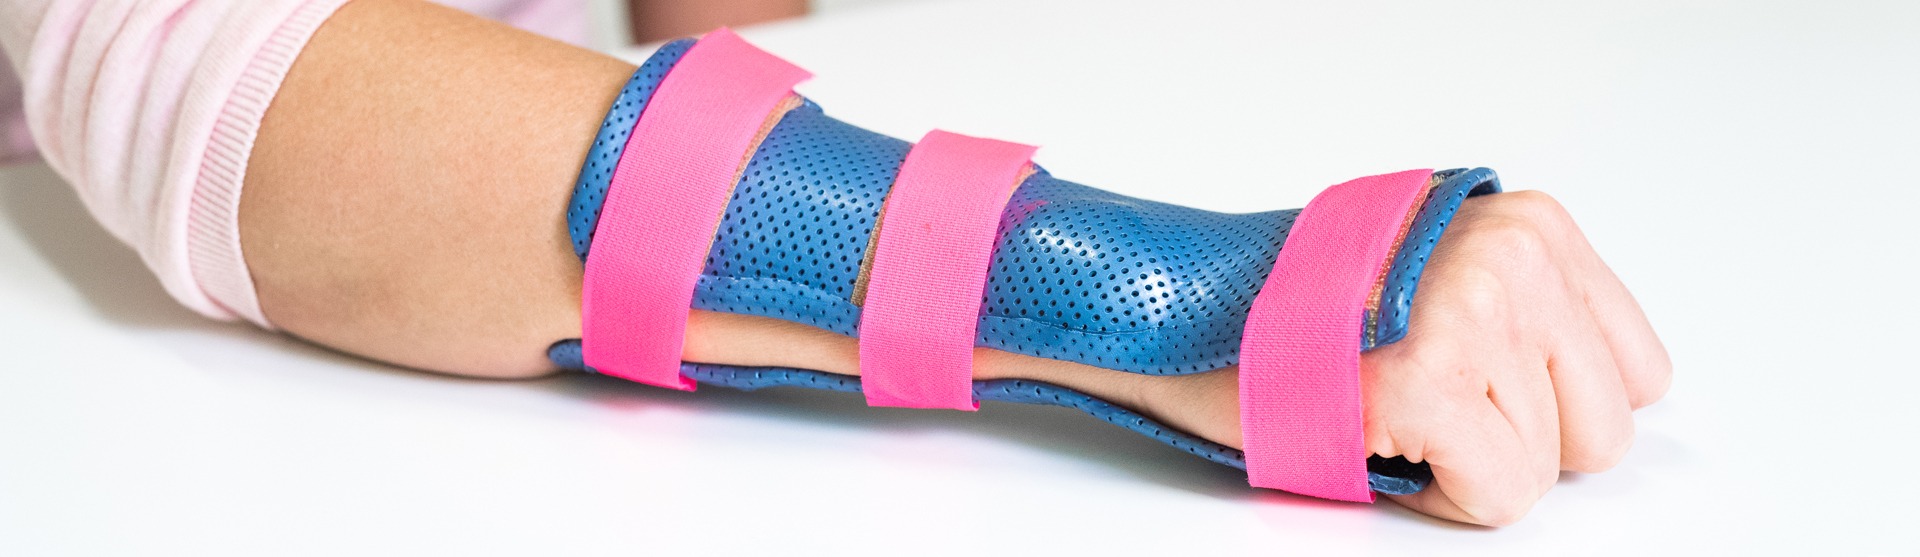 Specialising in <strong>custom made</strong> & <br /><strong> waterproof</strong> splints & hand braces